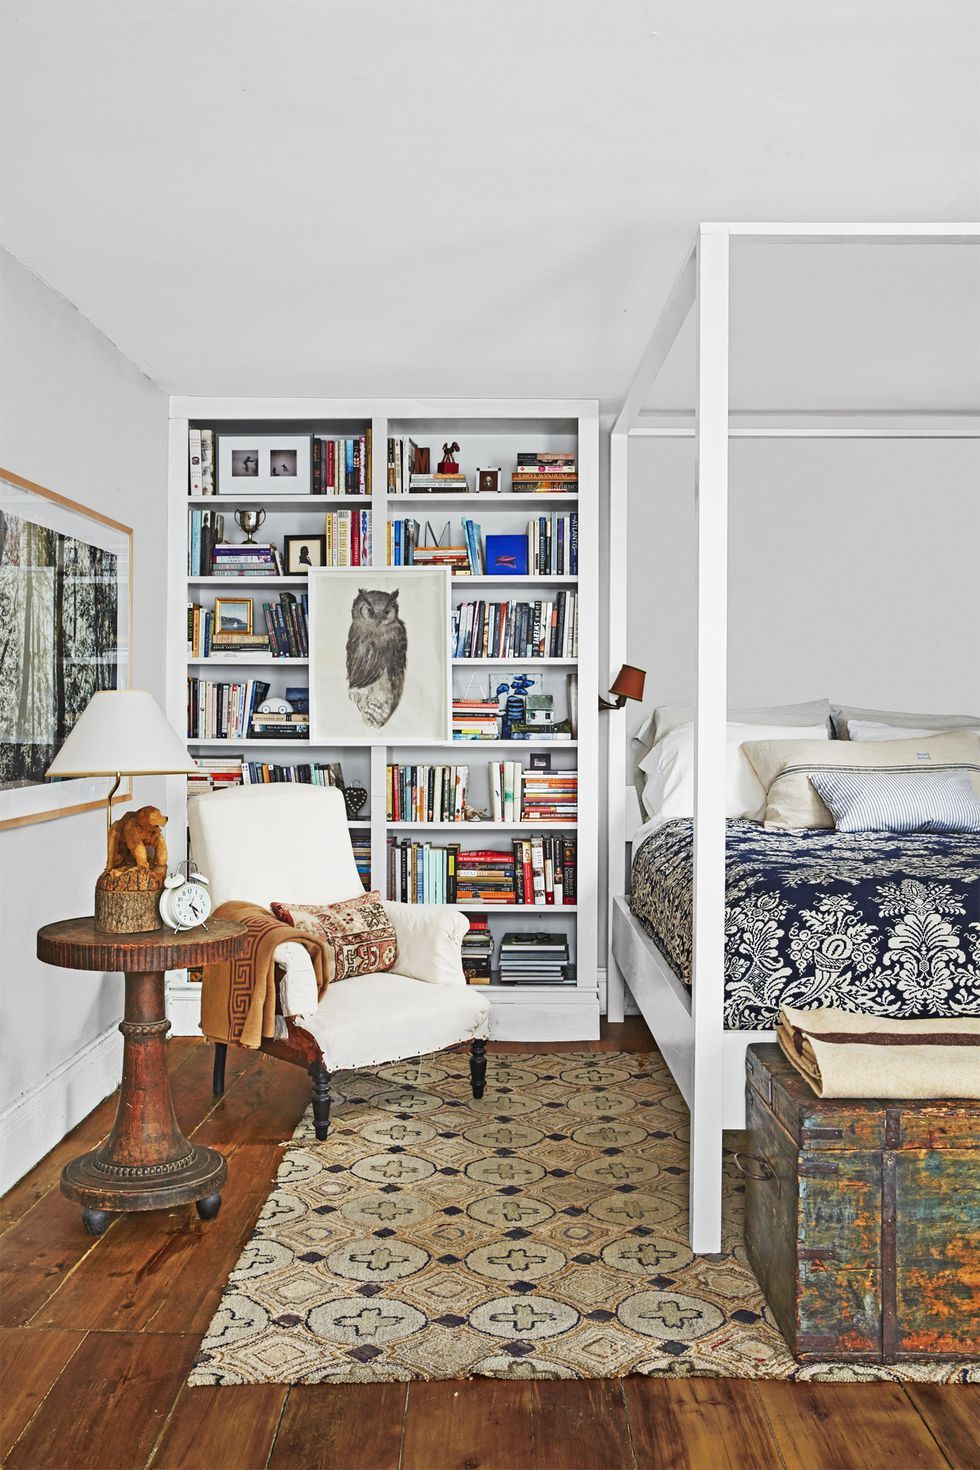 15 Storage Solutions For Small Bedrooms